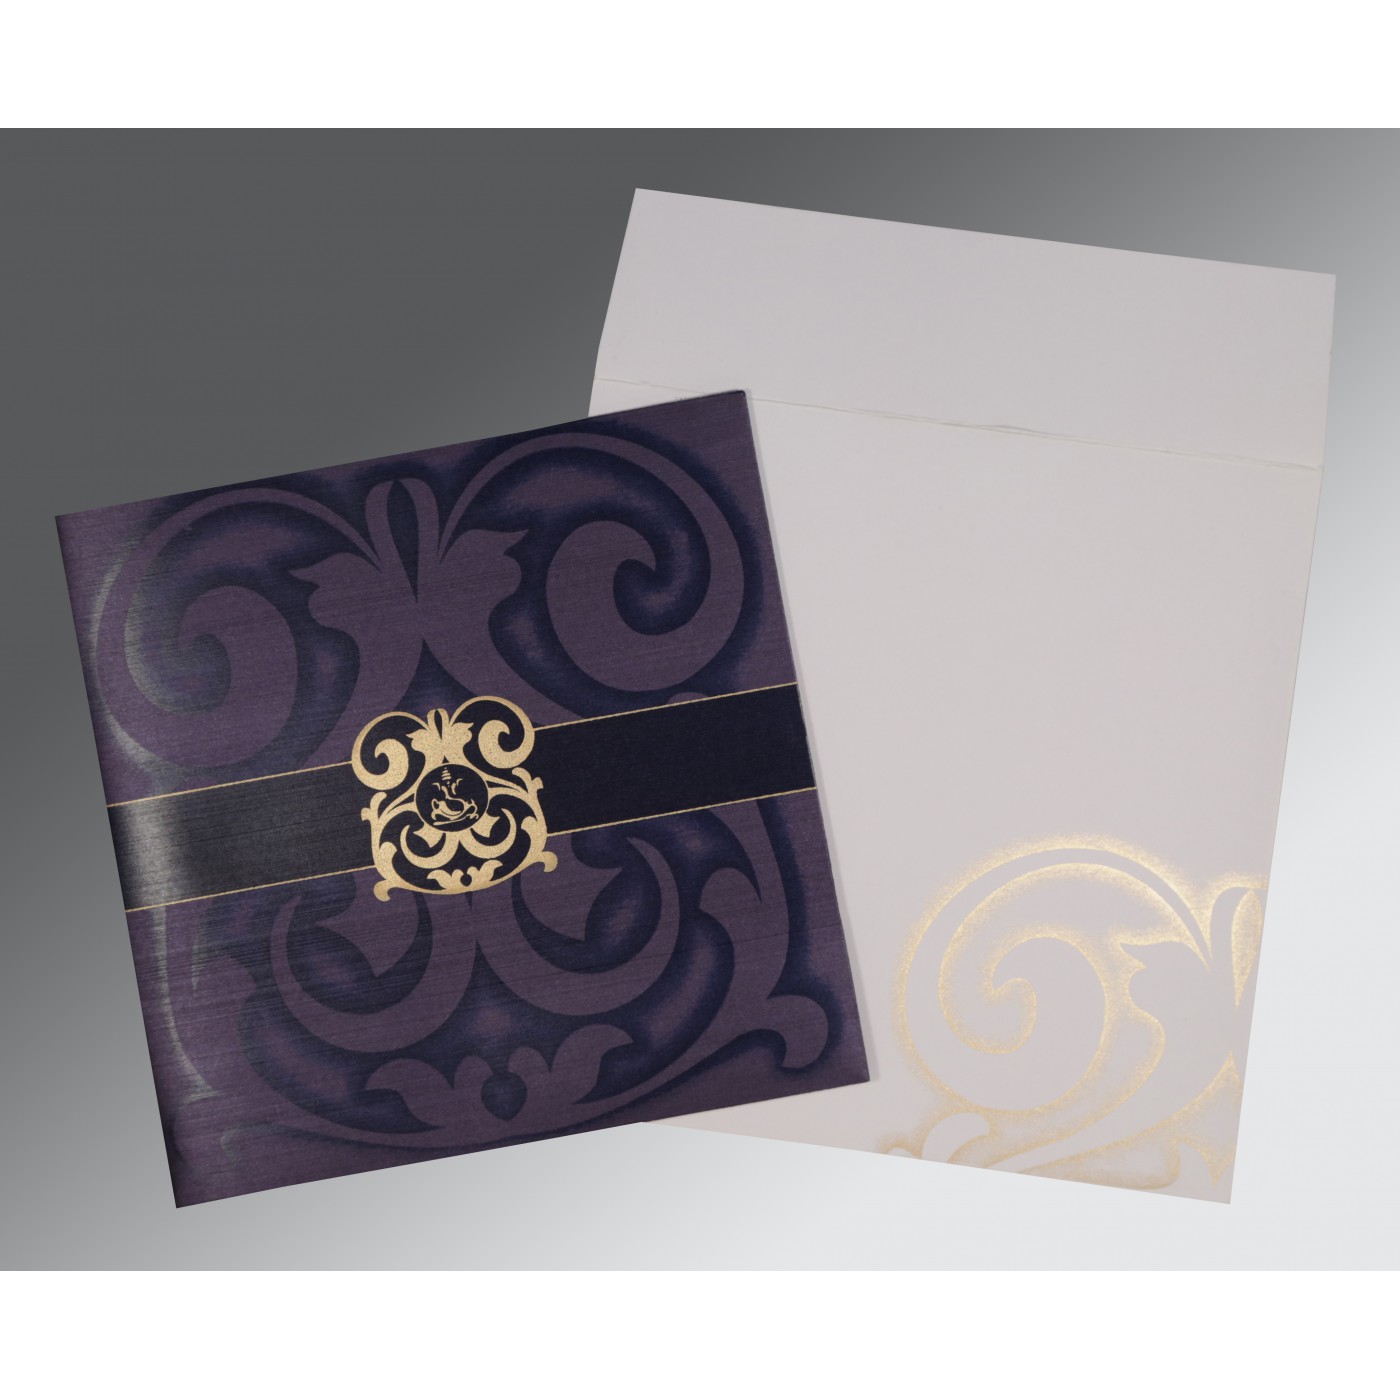 VIOLET SHIMMERY SCREEN PRINTED WEDDING CARD - New Jersey - Jersey City ID1540090